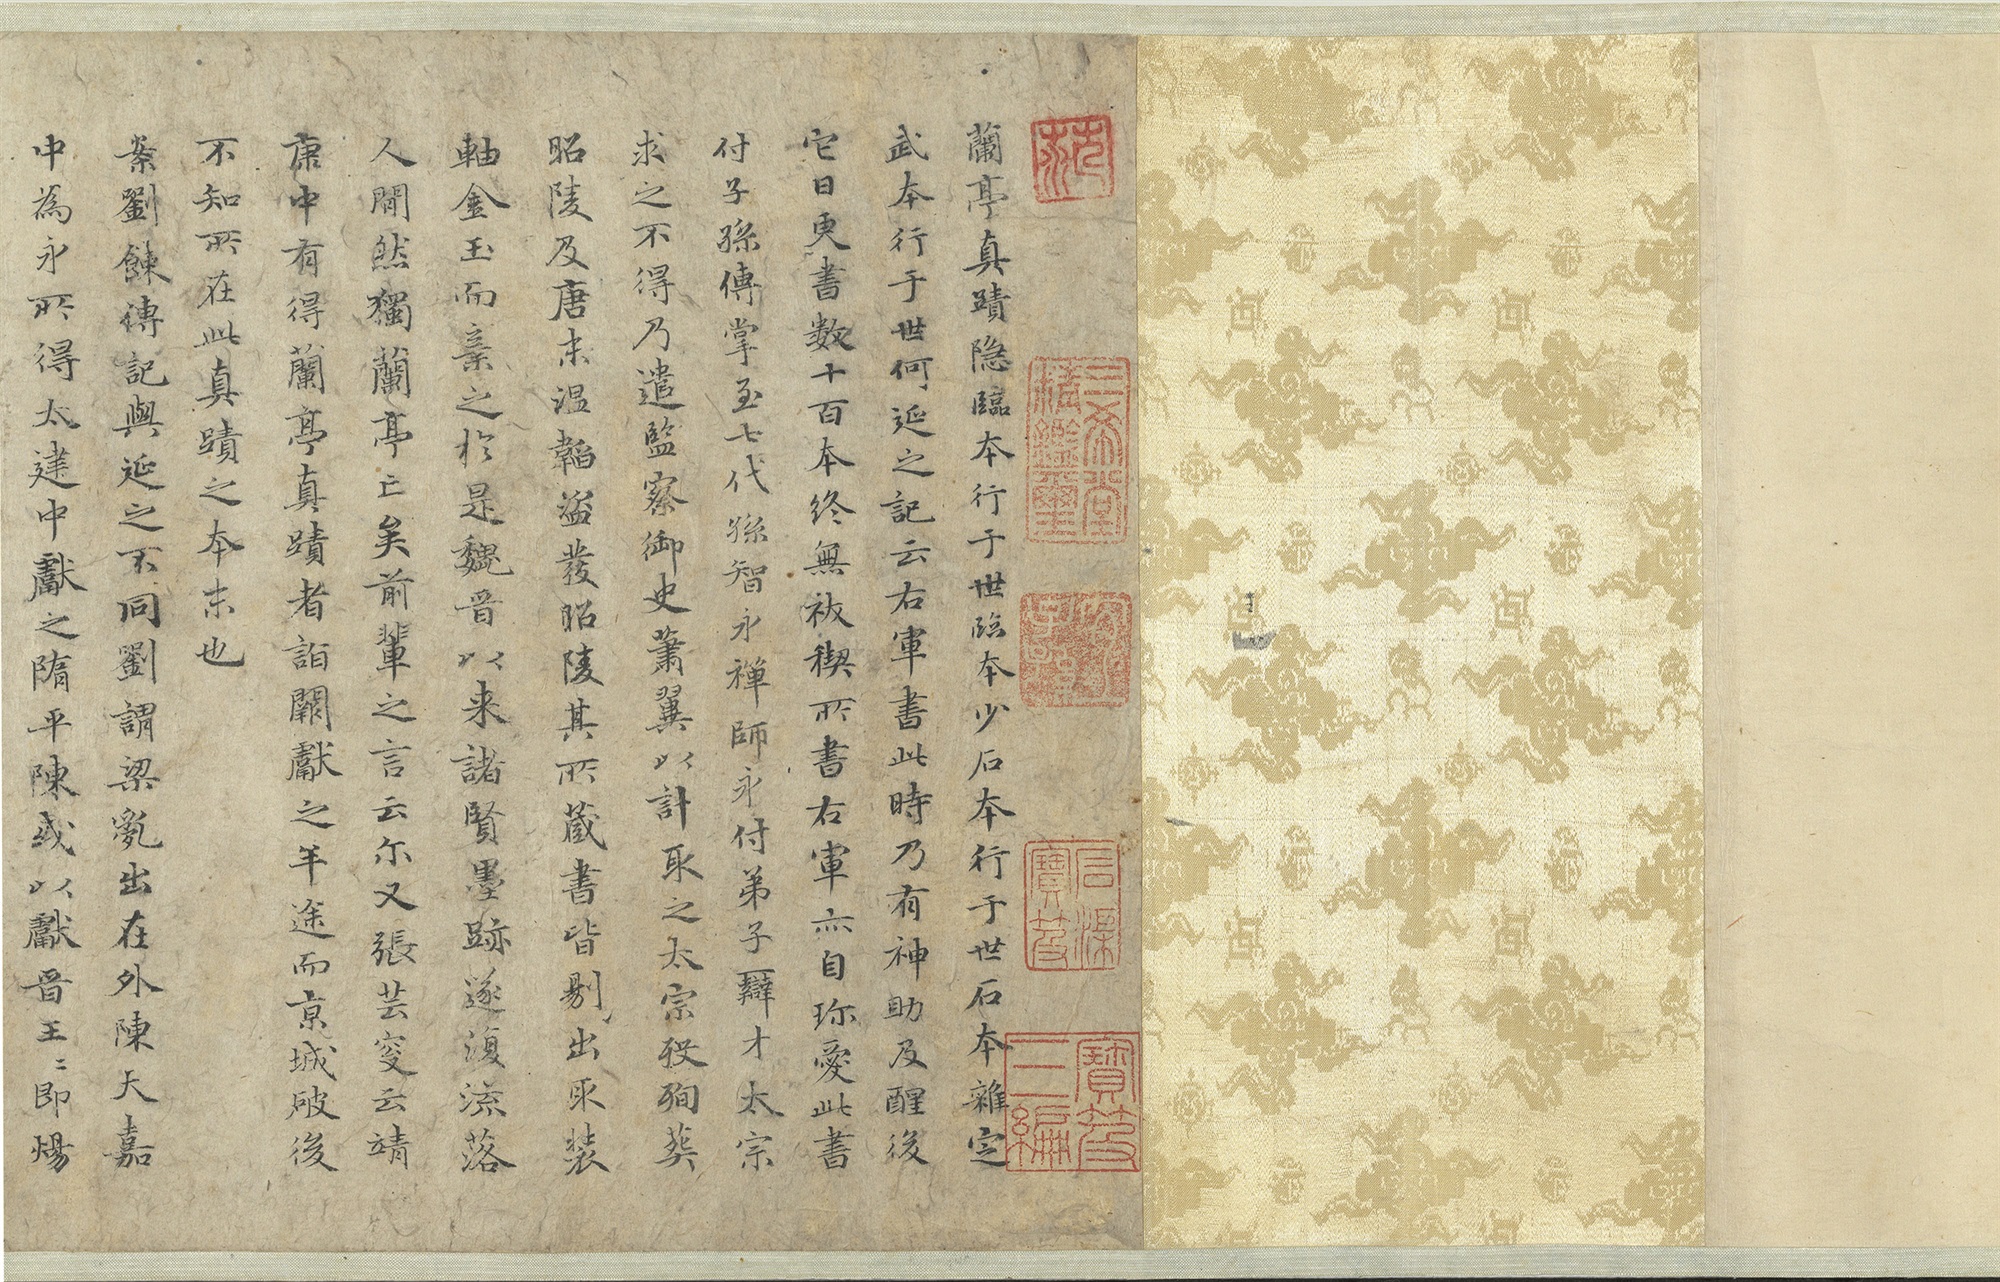 On the Origins of the “Orchid Pavilion Preface”  Zhao Mengfu, Yuan dynasty